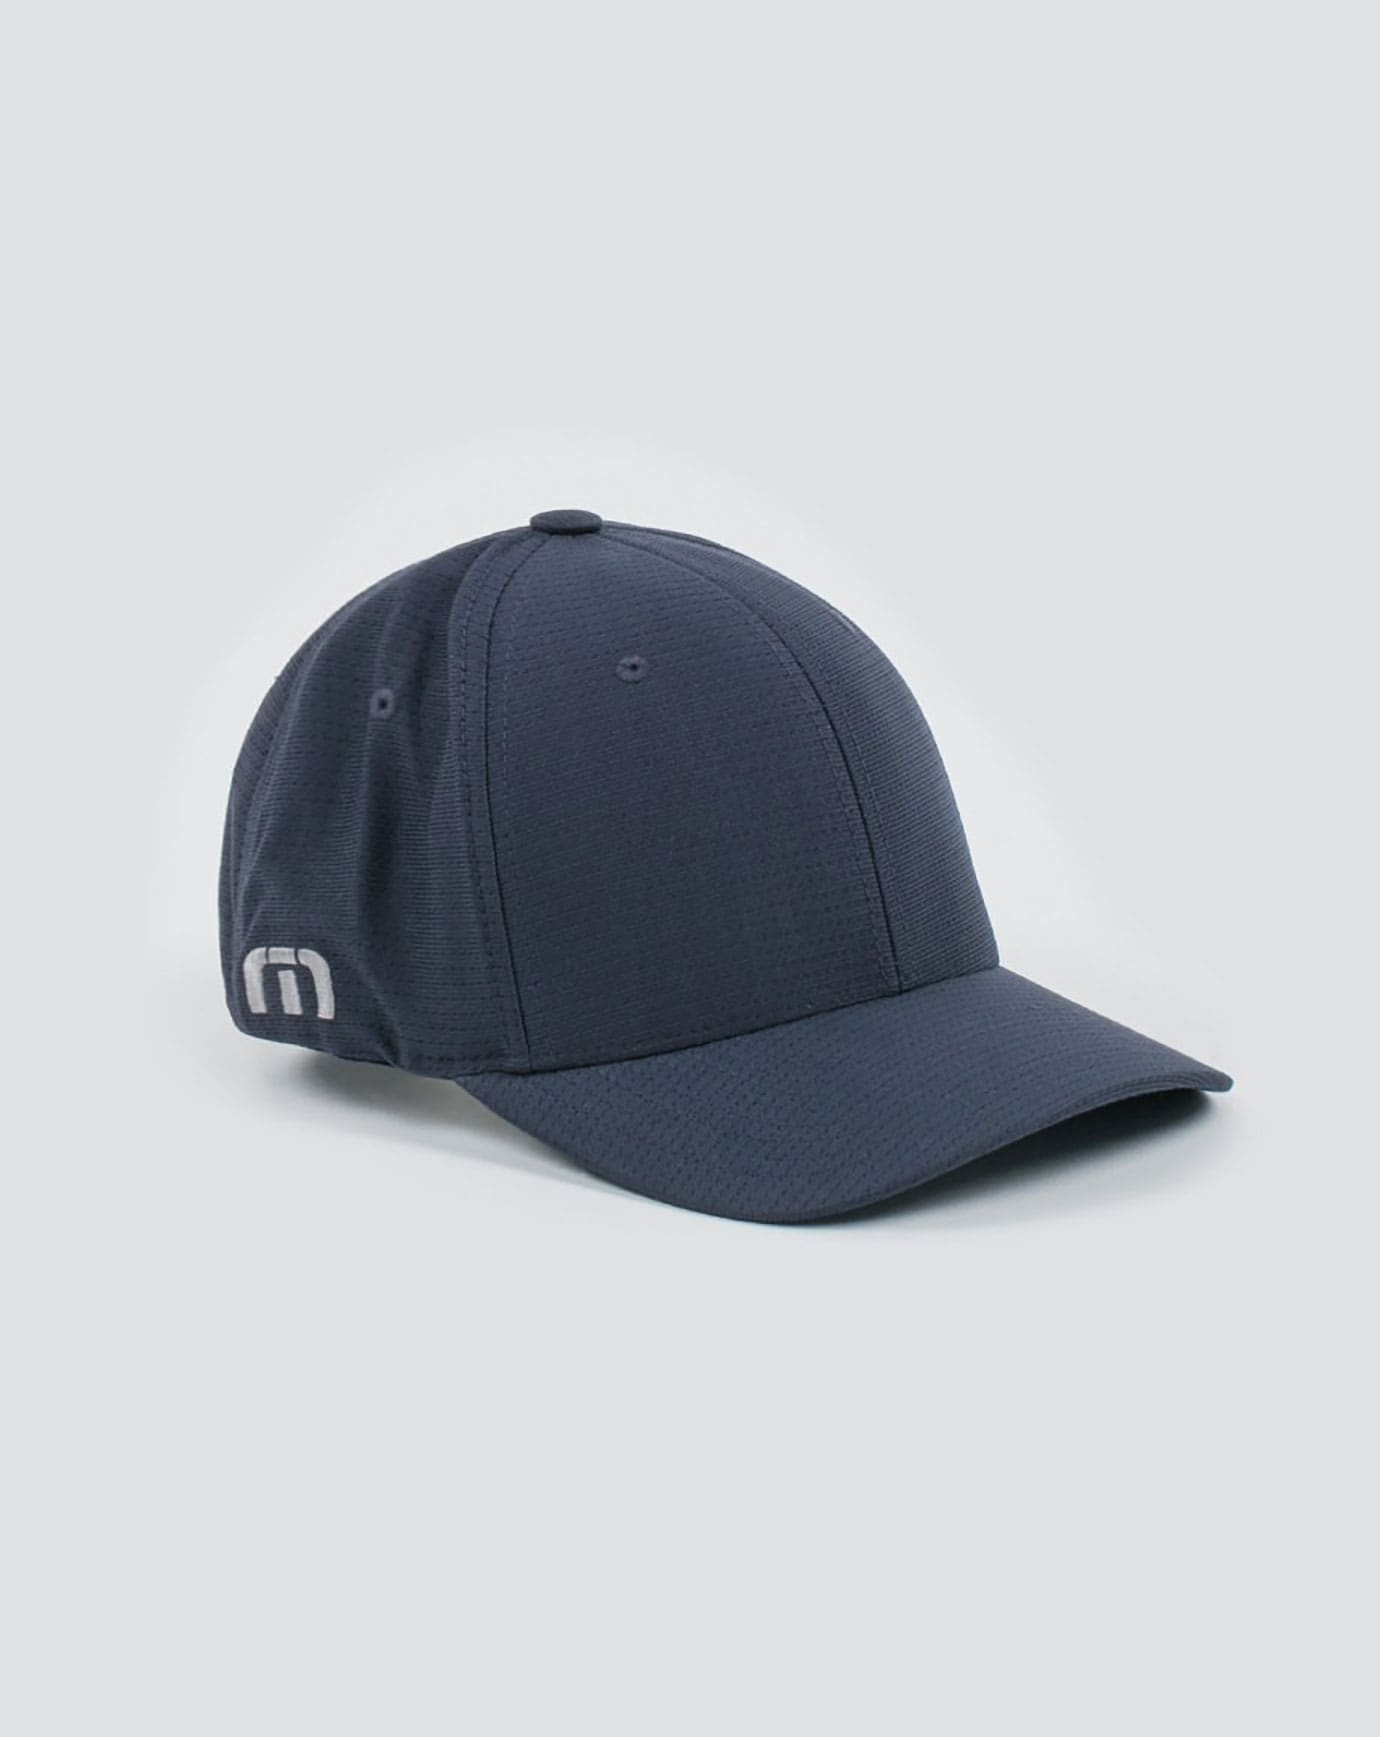 NASSAU FITTED HAT Image Thumbnail 2